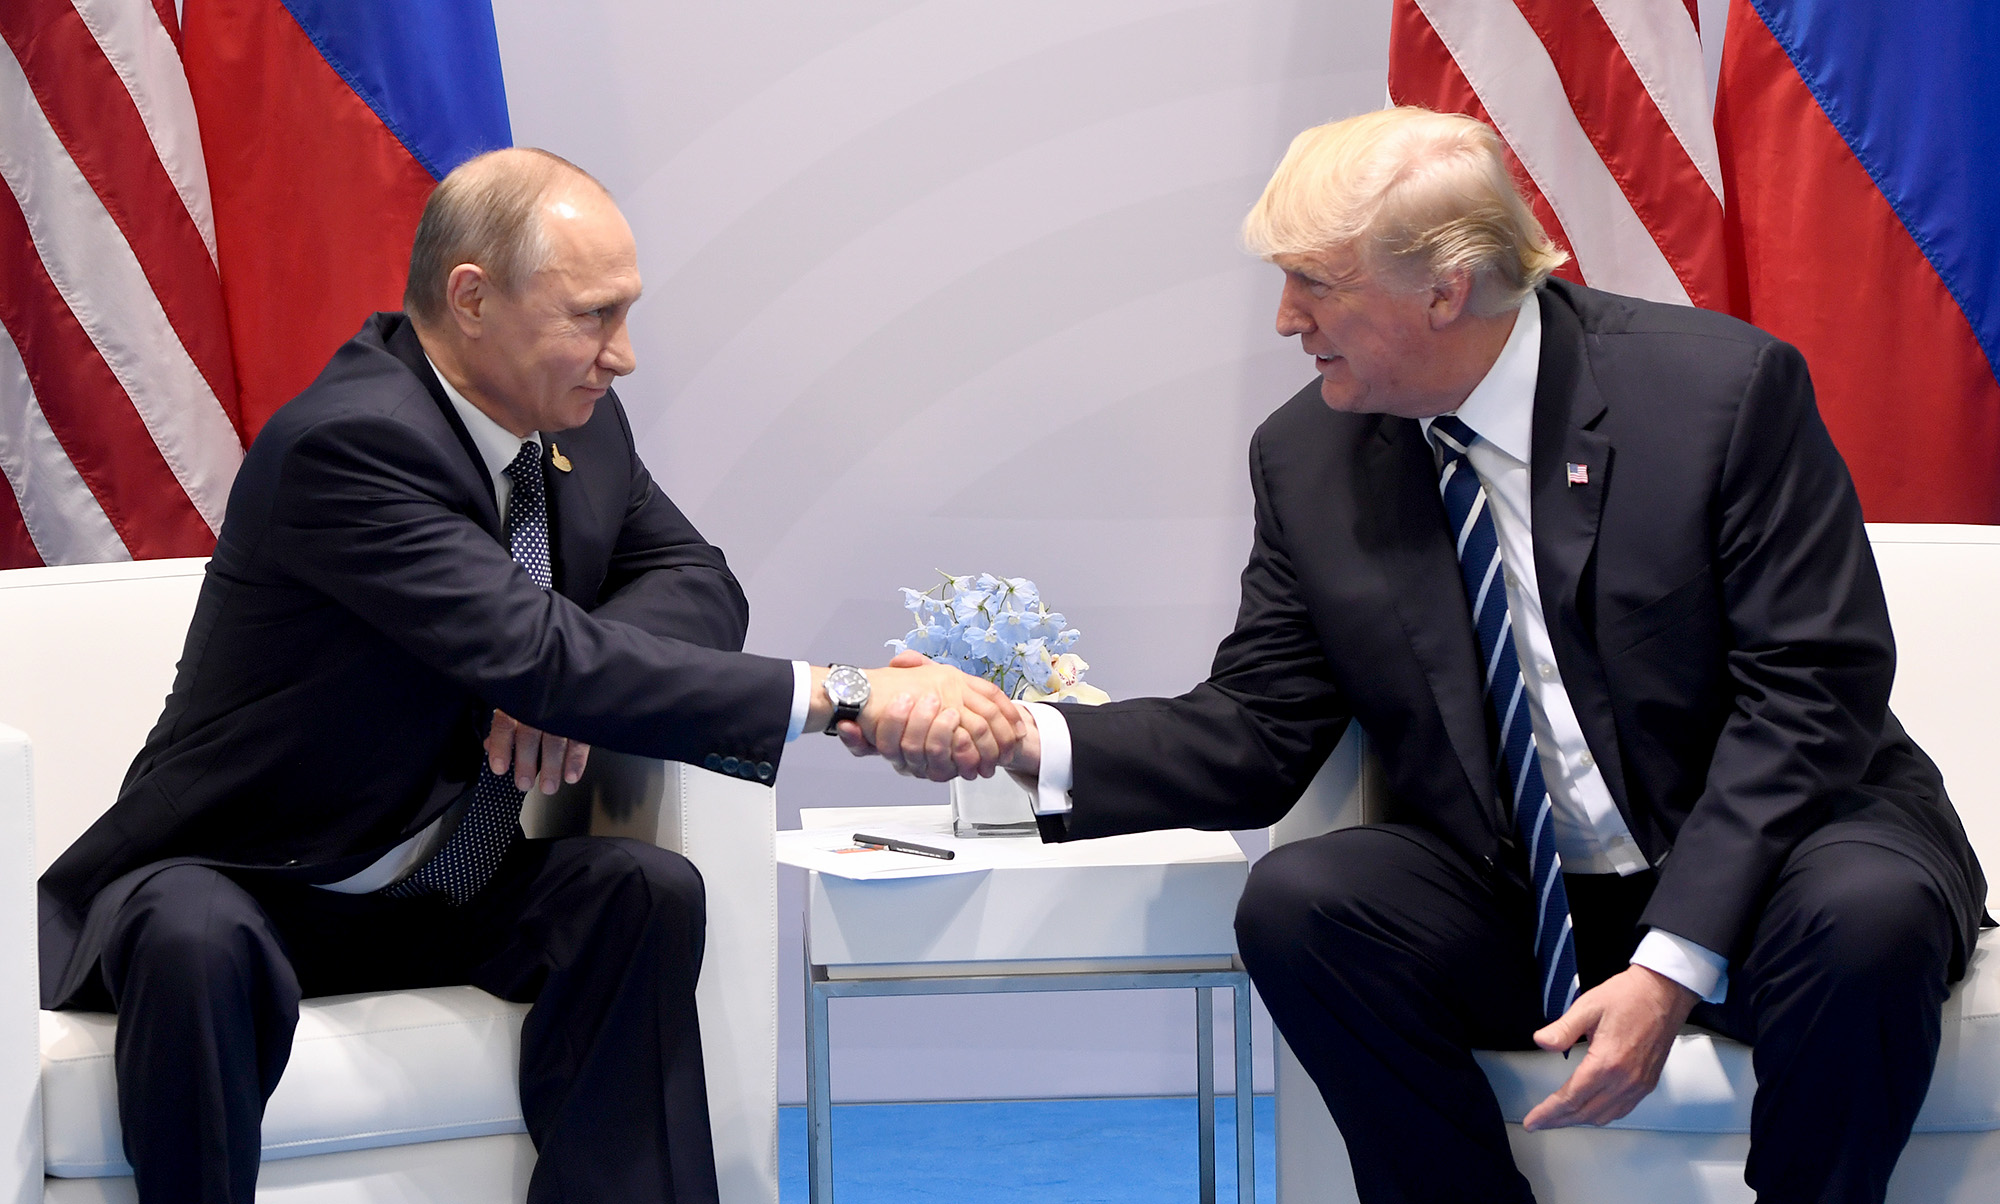 Vladimir Putin and&nbsp;Donald Trump shake hands during a meeting on the sidelines of the G20 Summit in Hamburg&nbsp;on July 7, 2017.&nbsp;